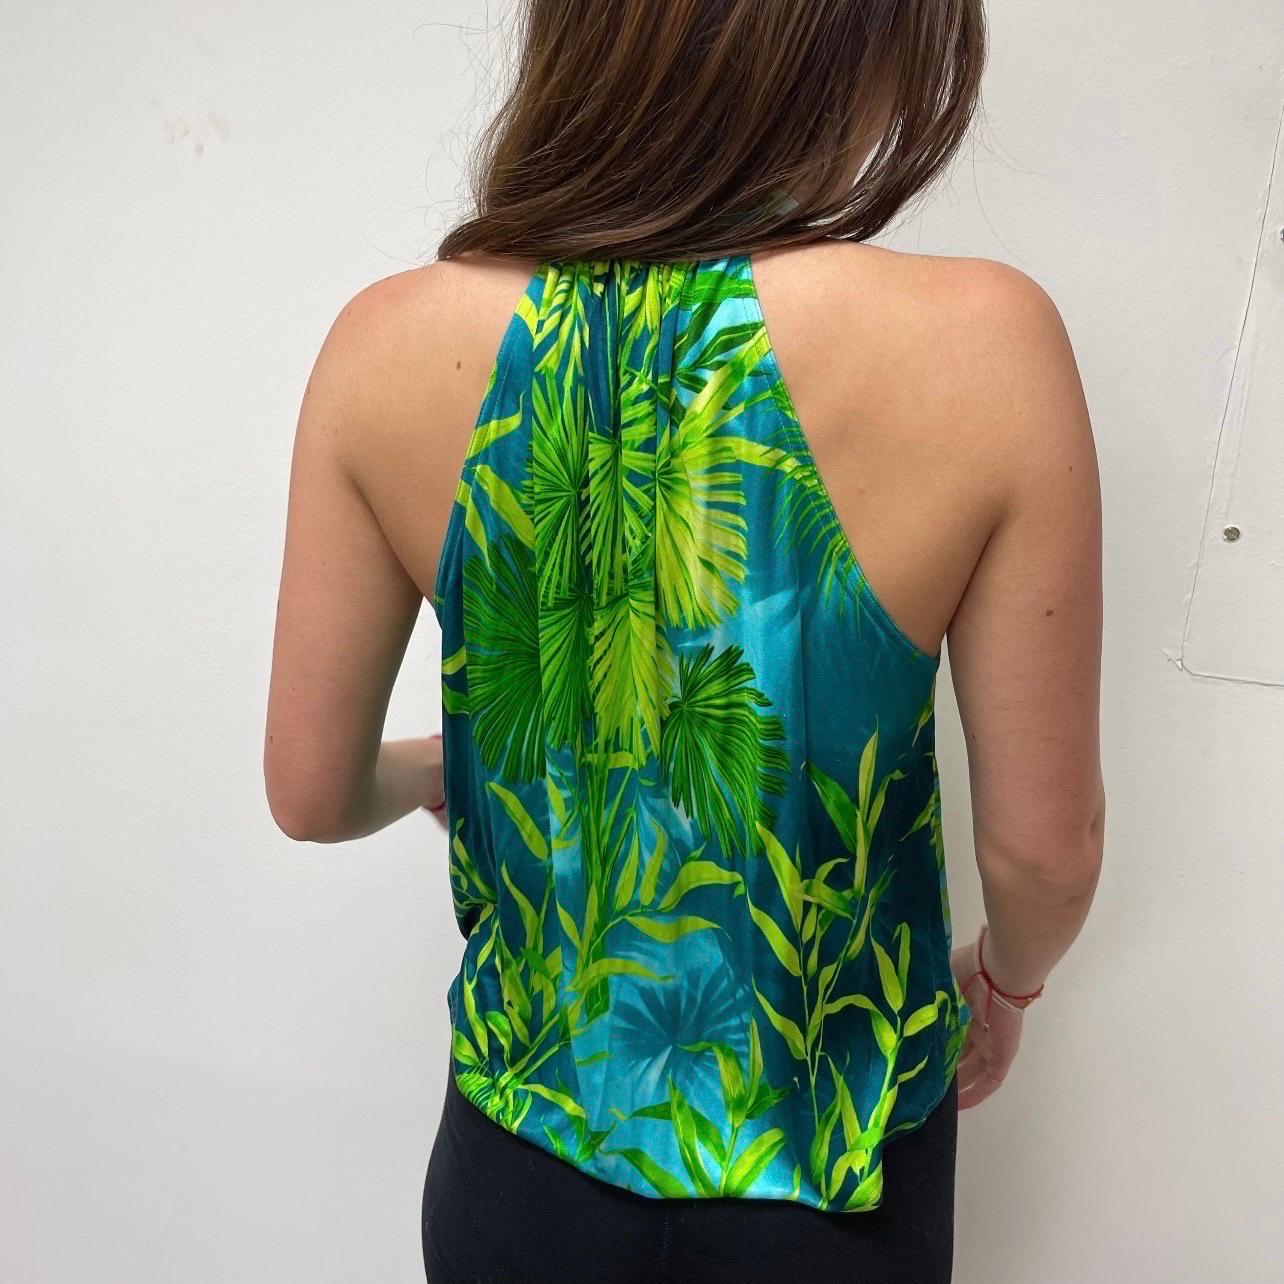 Vintage Gianni Versace Jungle Print Versace Halter Top from S/S 2000 For Sale 3